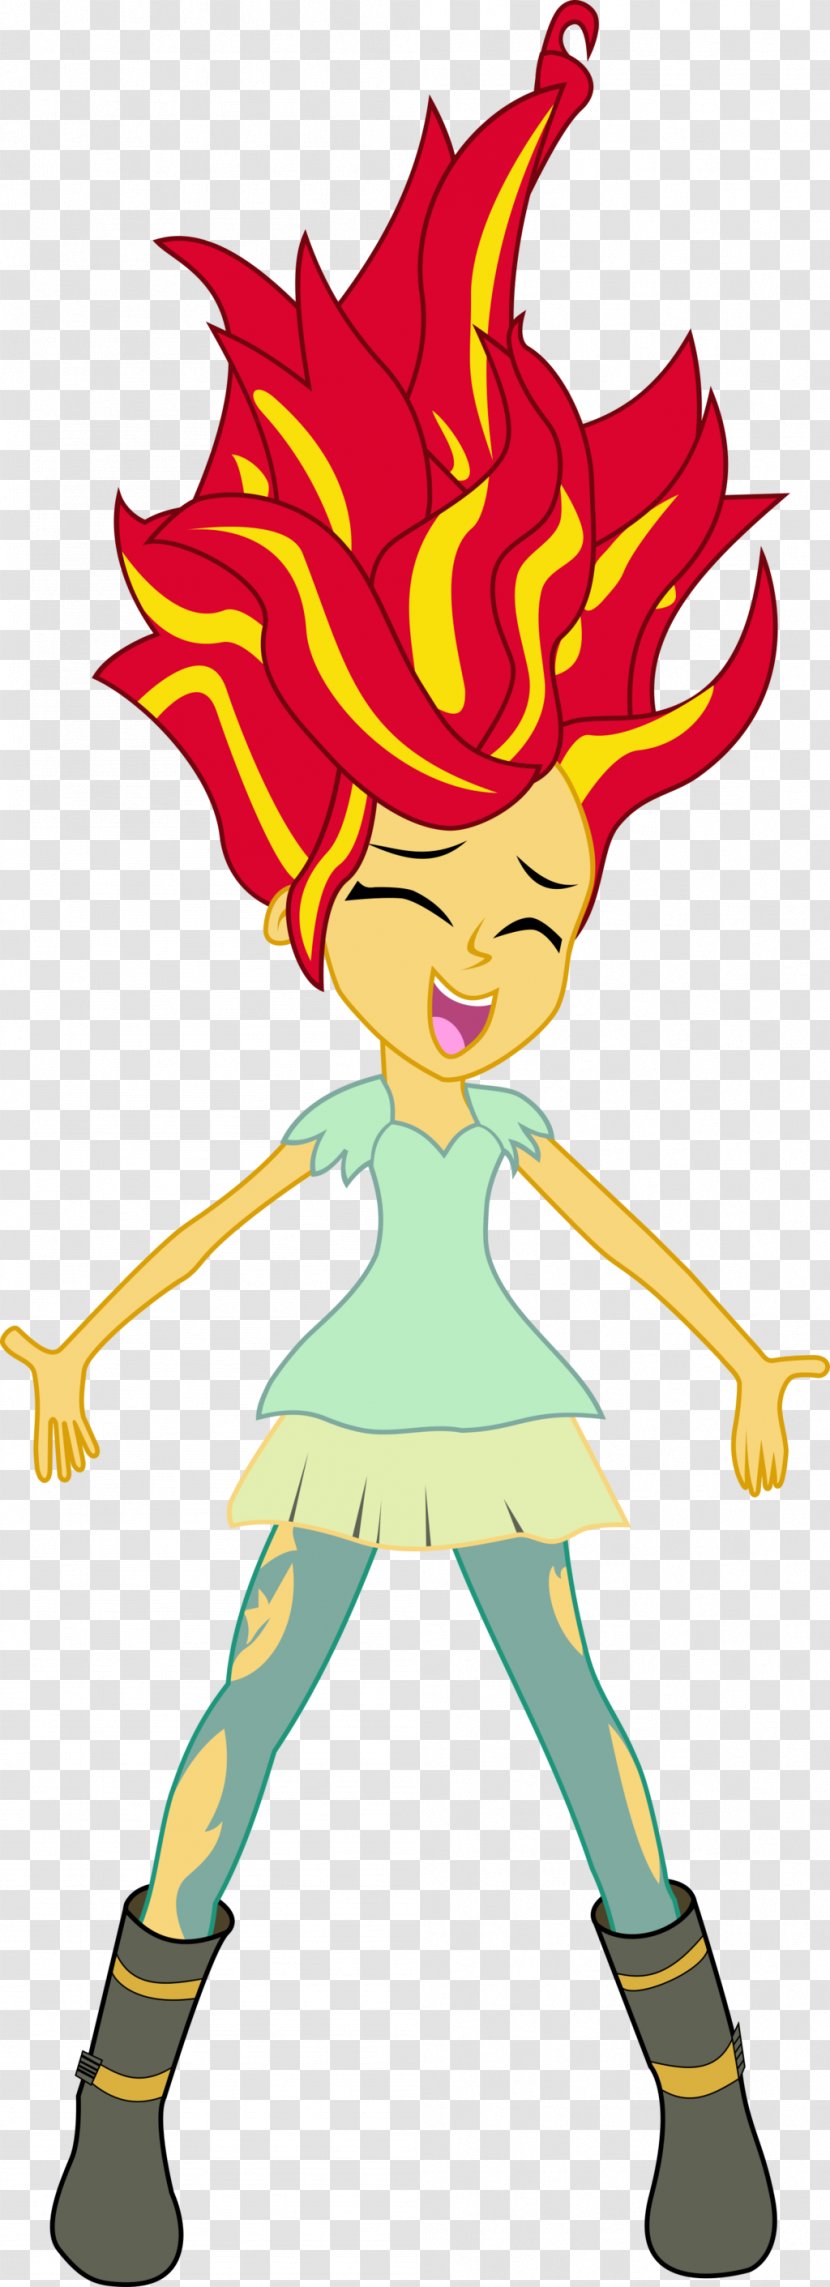 Sunset Shimmer My Little Pony: Equestria Girls Image Clip Art Animated Cartoon - Character - Rainbow Rocks Dolls Transparent PNG